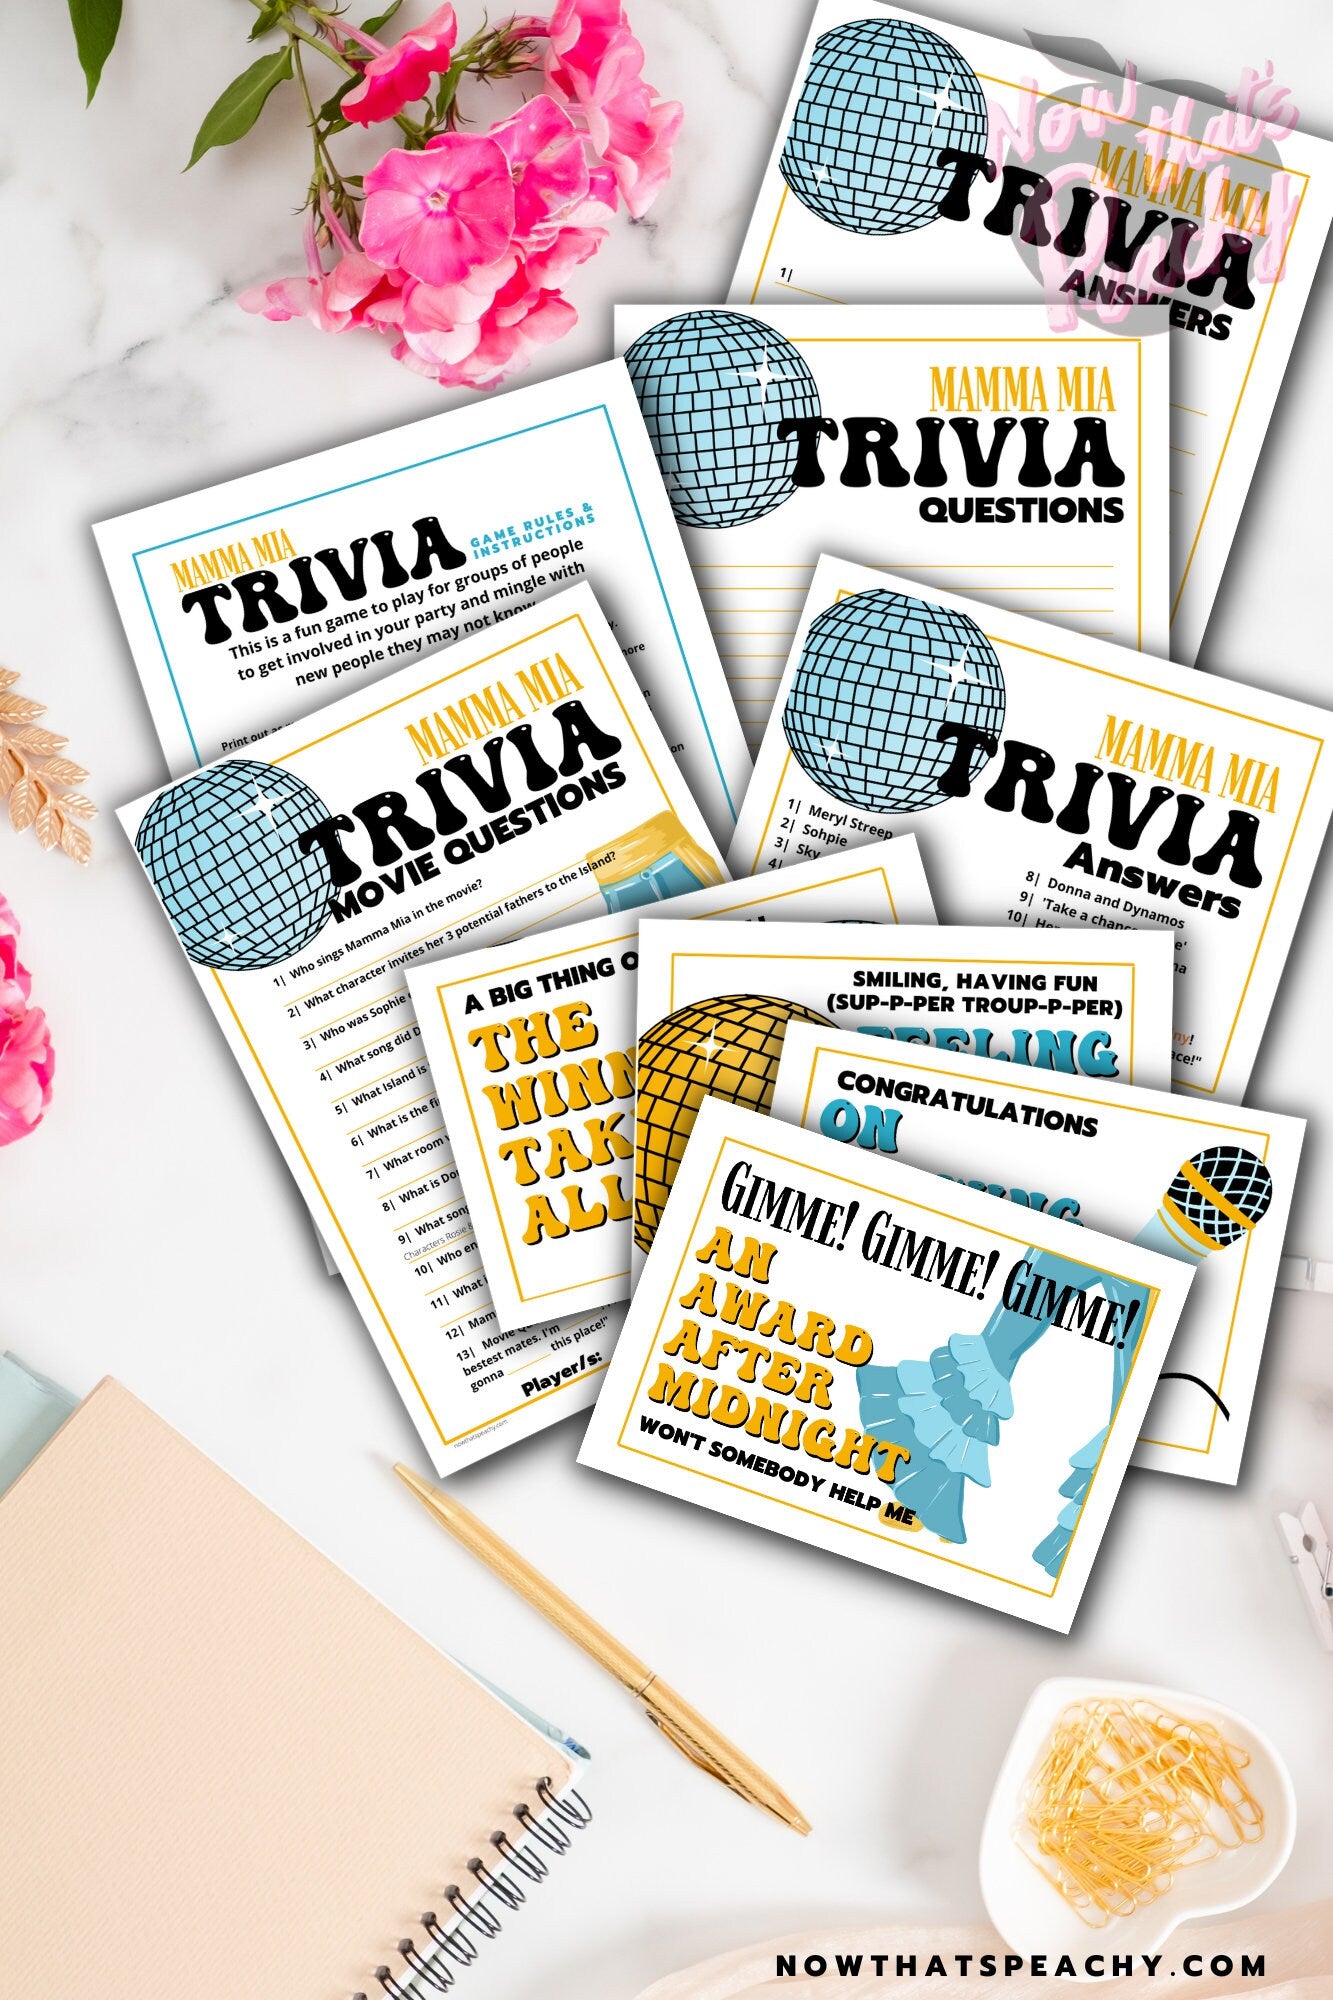 Mamma Mia trivia quiz question game 1970s flared denim pants seventies 70's disco ball karaoke  printable template digital instant download edit Donna and the dynamos invite edit custom musical movie design black white modern color fun themed bachelorette birthday charity event activity